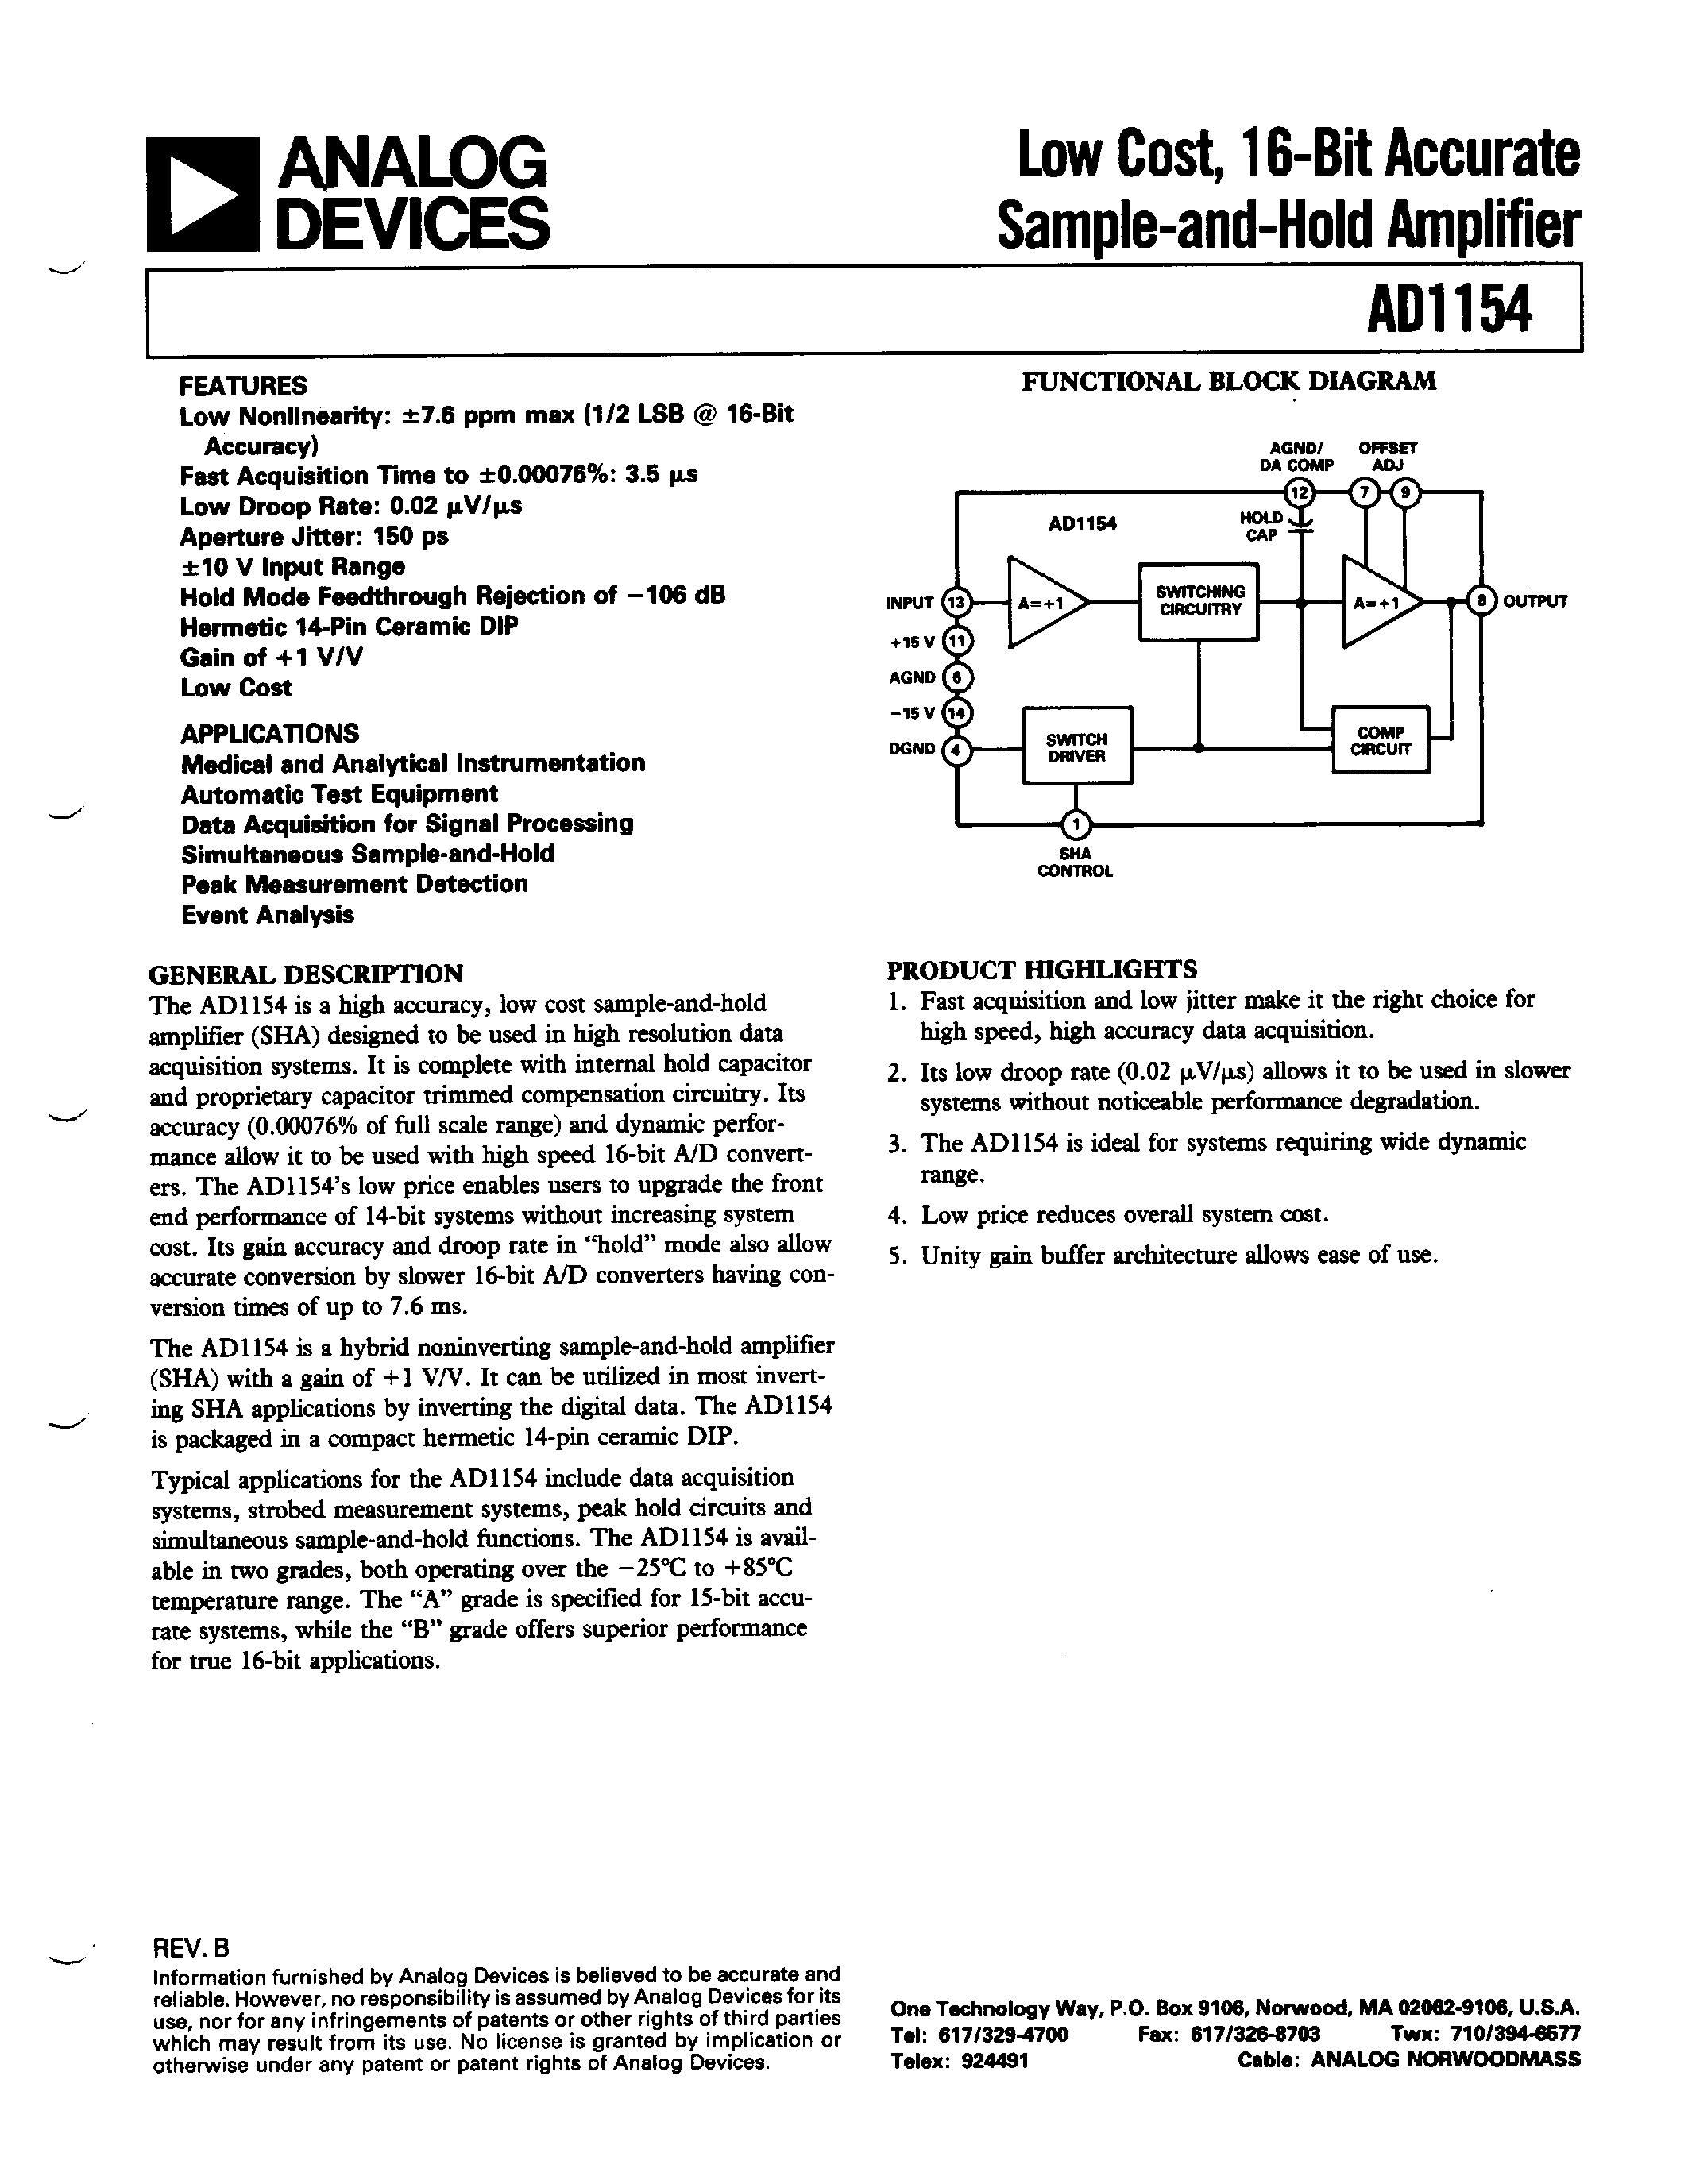 Datasheet AD1154AD - Low Cost/ 16-Bit Accurate Sample-and-Hold Amplifier page 1